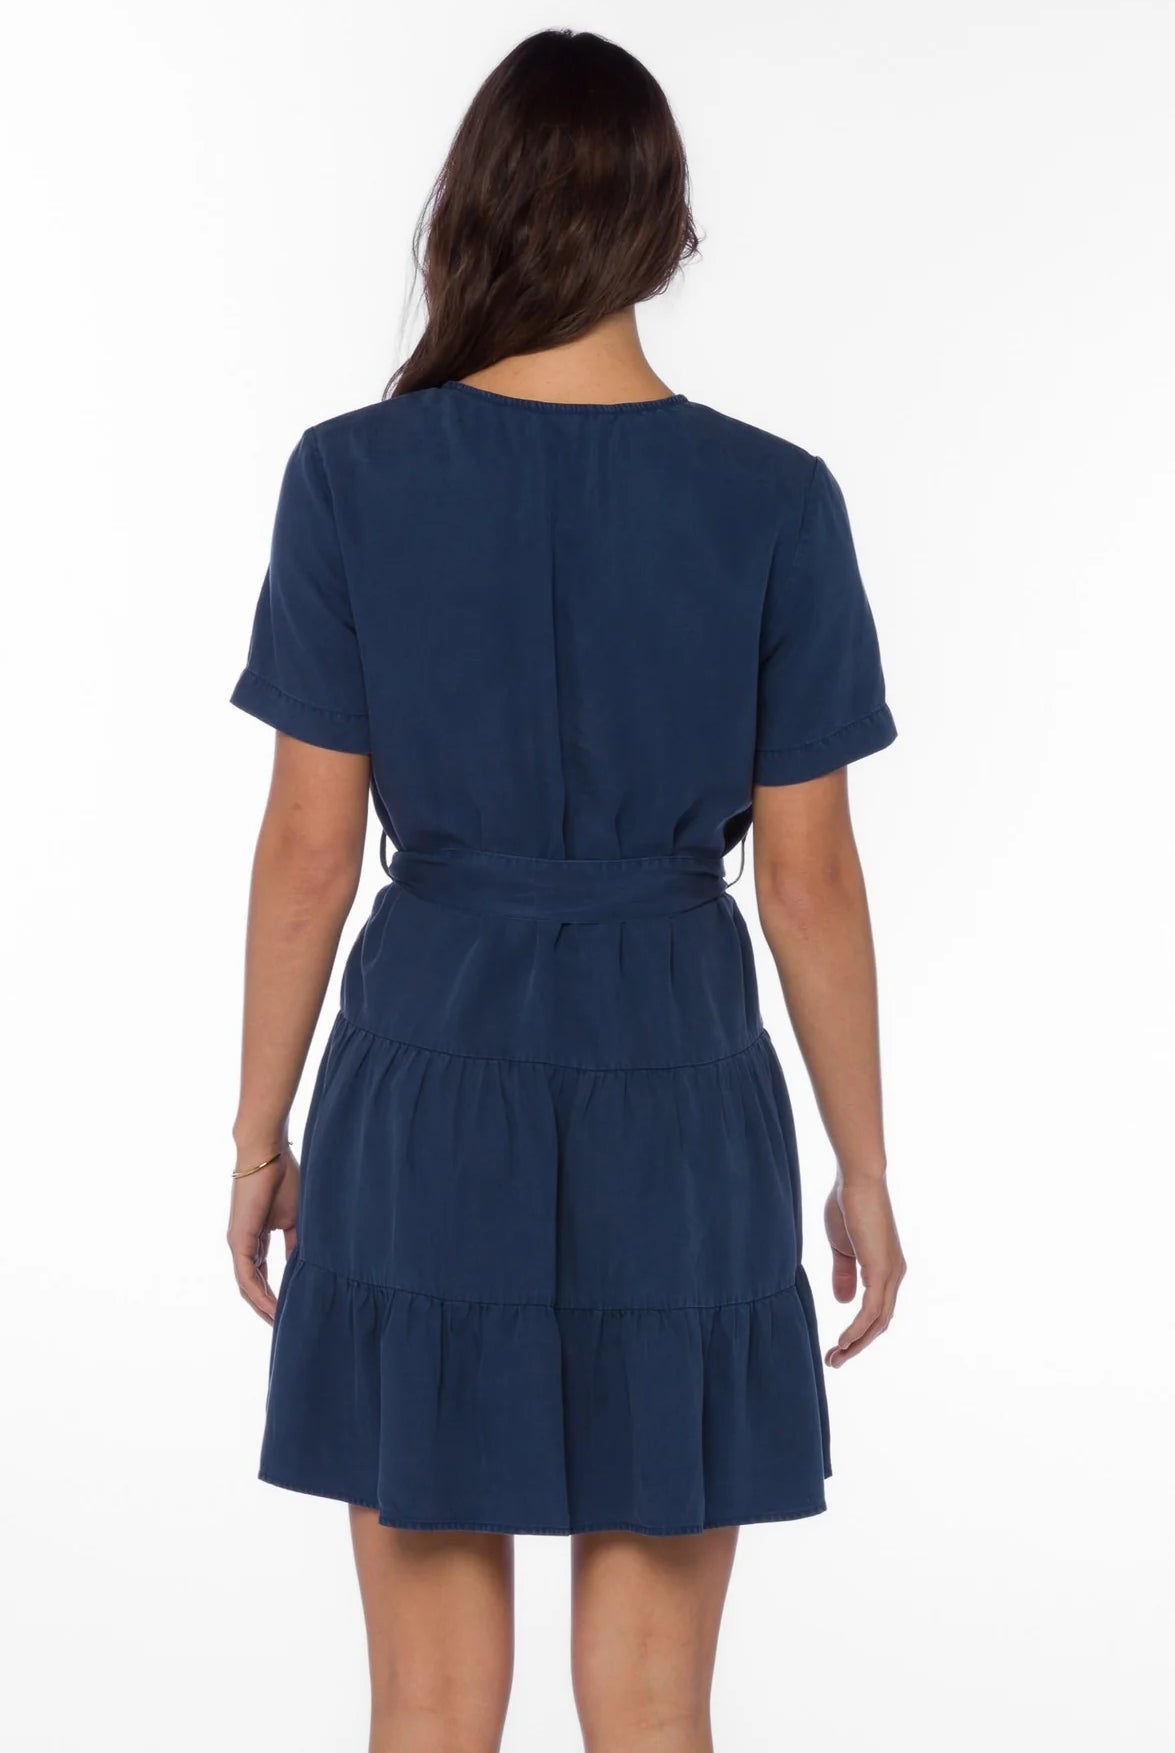 Navy Tiered Dress Apex Ethical Boutique